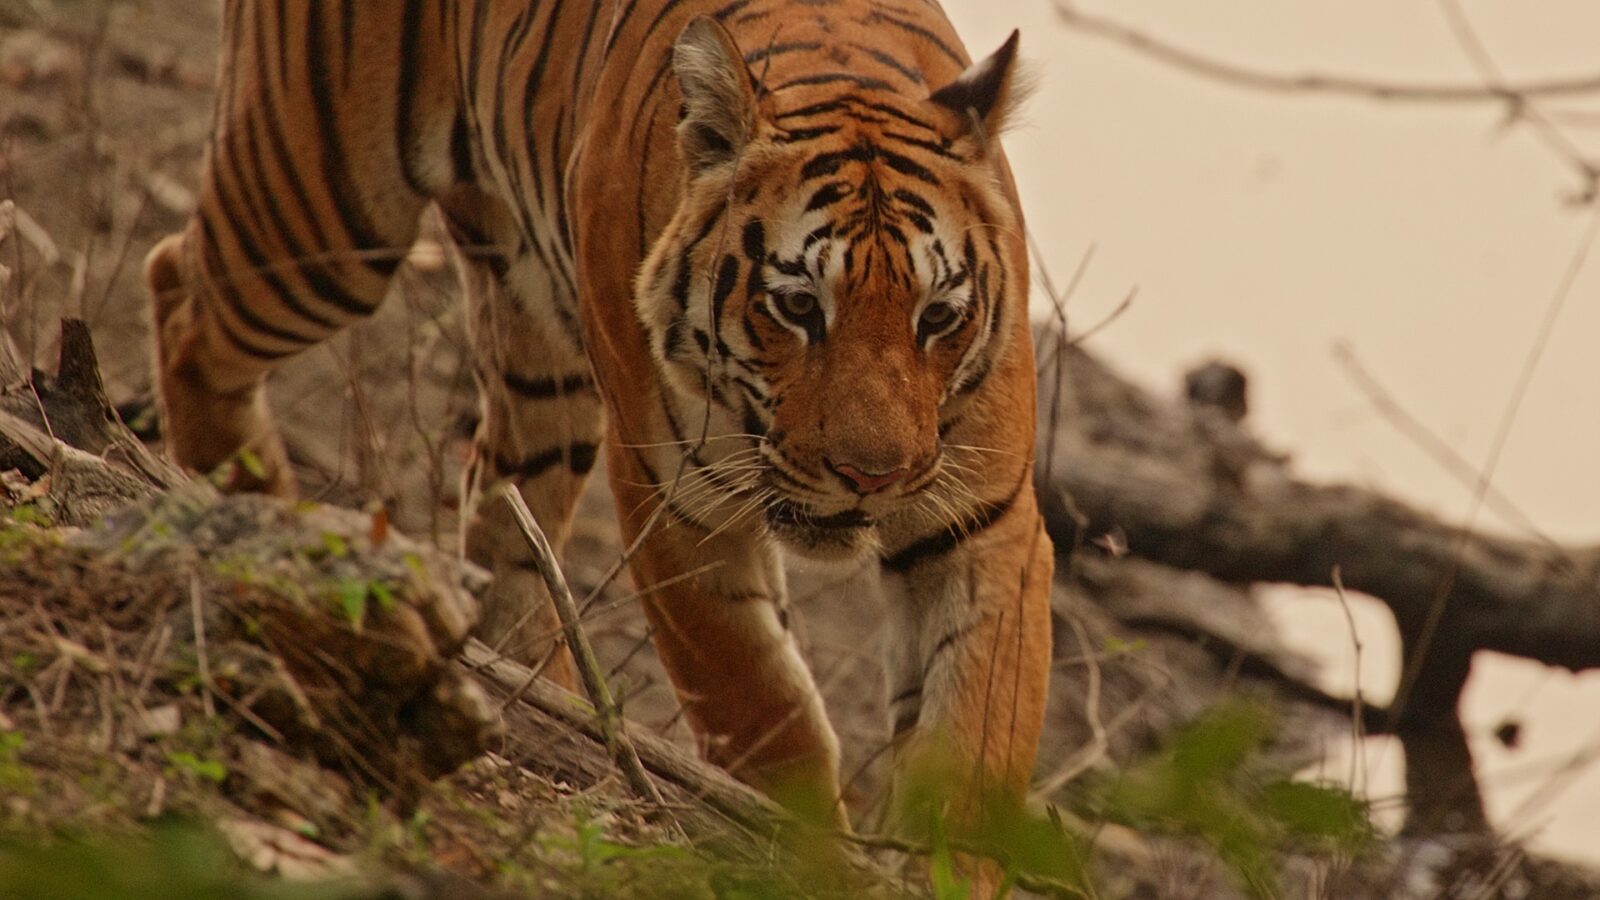 The large Bengal tiger